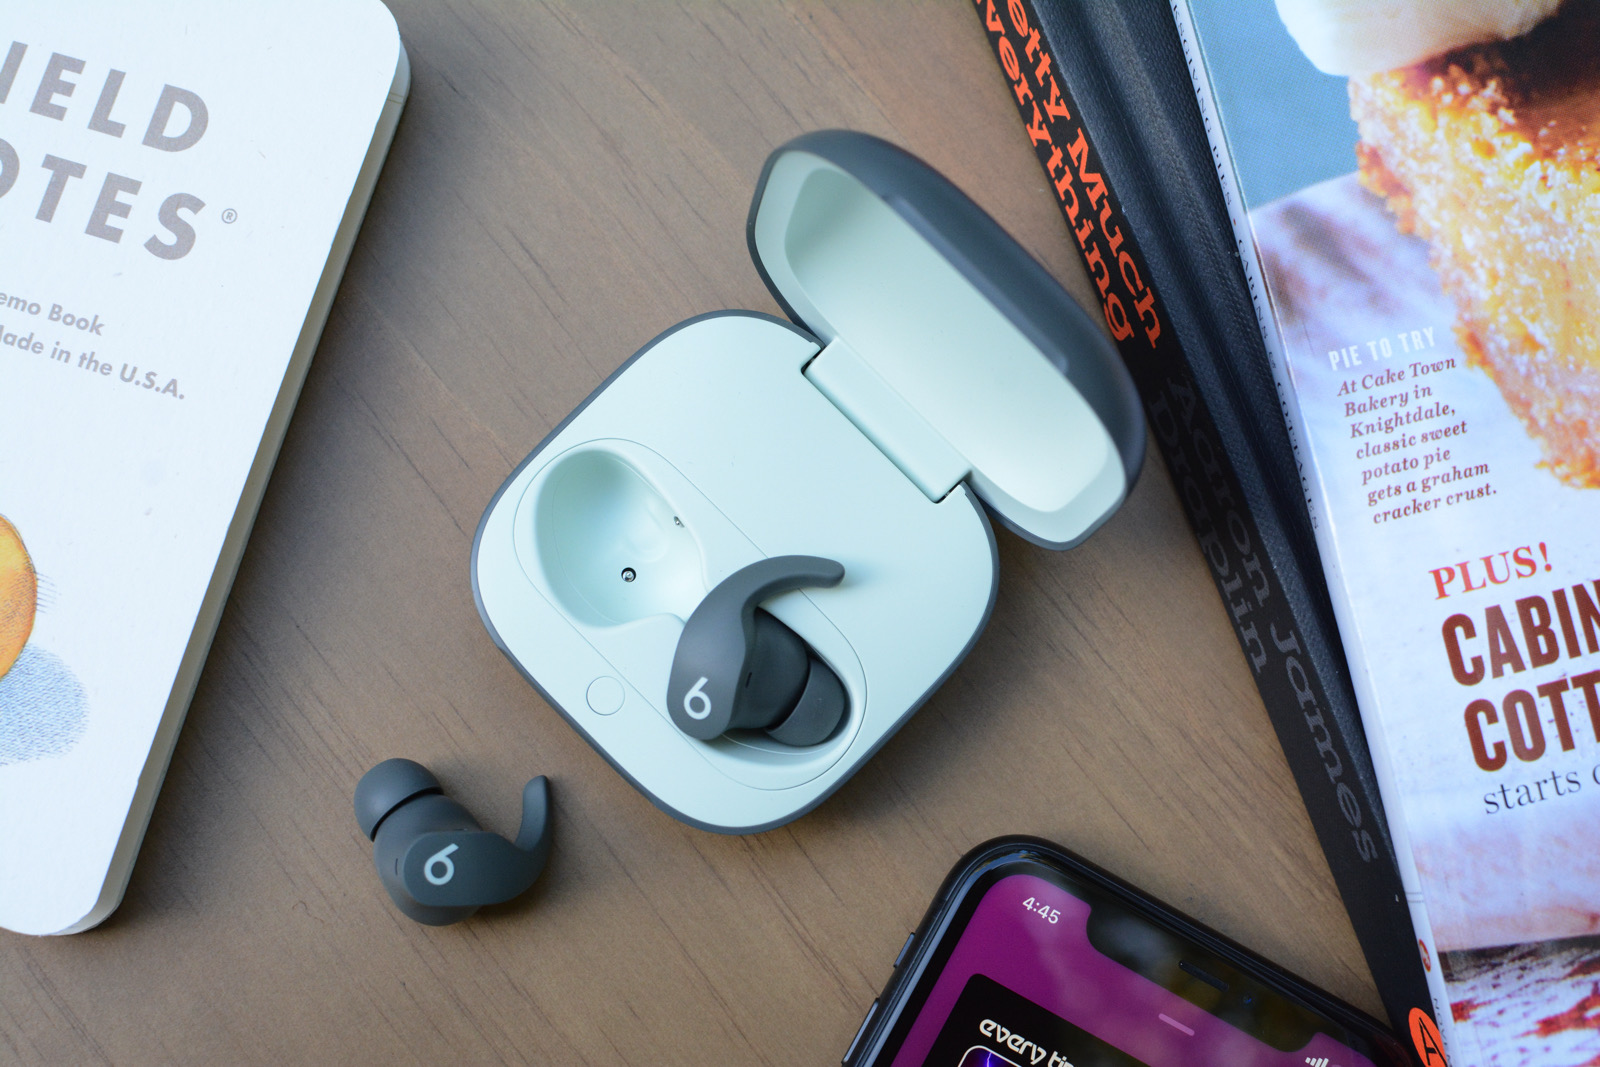 Beats’ latest true wireless earbuds offer all of the best features from Apple’s new AirPods in a less polarizing design." data-uuid="3e0614ee-cf6a-3437-b4df-fd2aa00f64fb